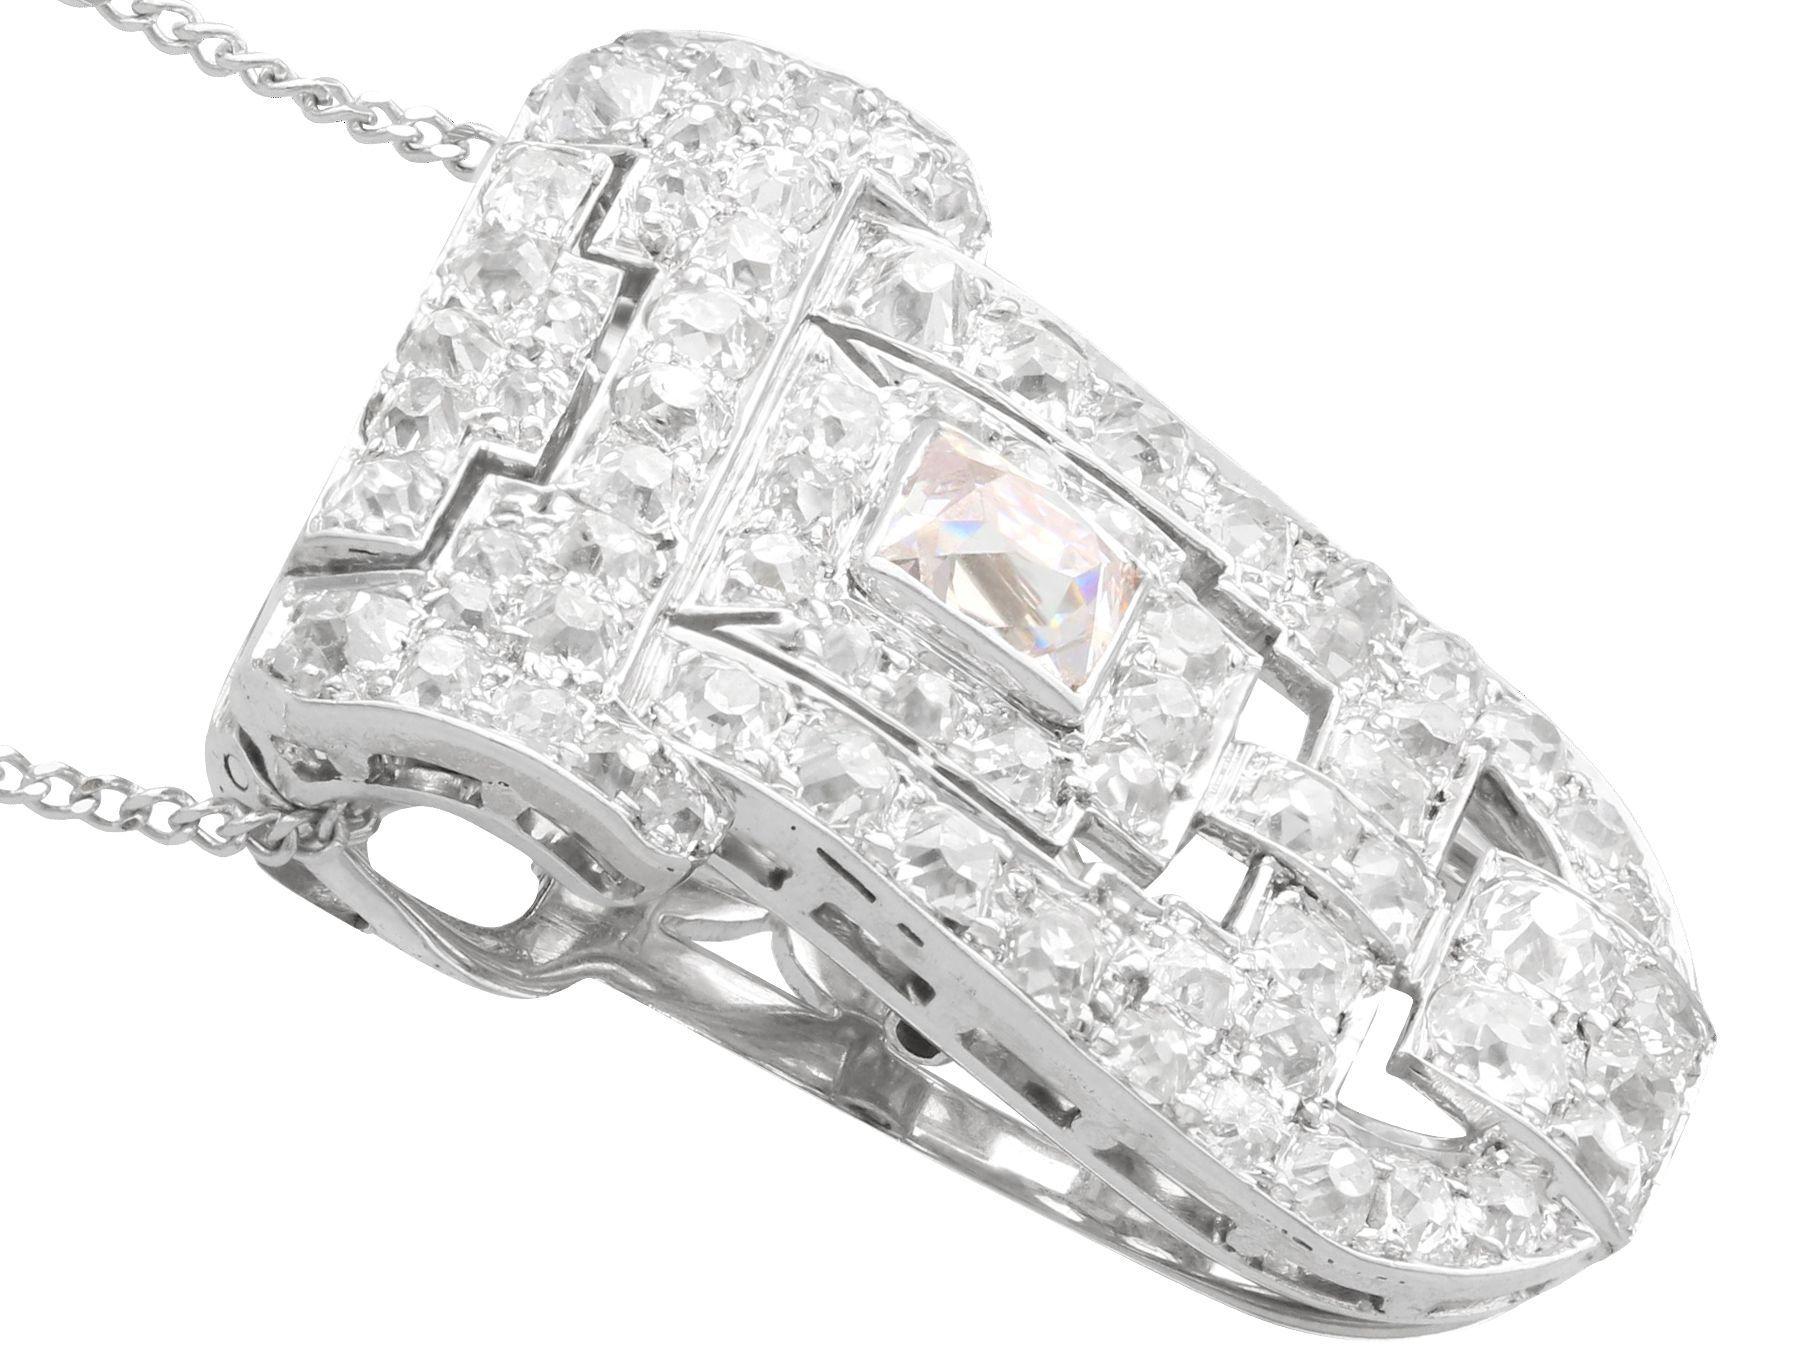 Old European Cut Art Deco 3.87 Carat Diamond and White Gold Clip Brooch / Pendant For Sale